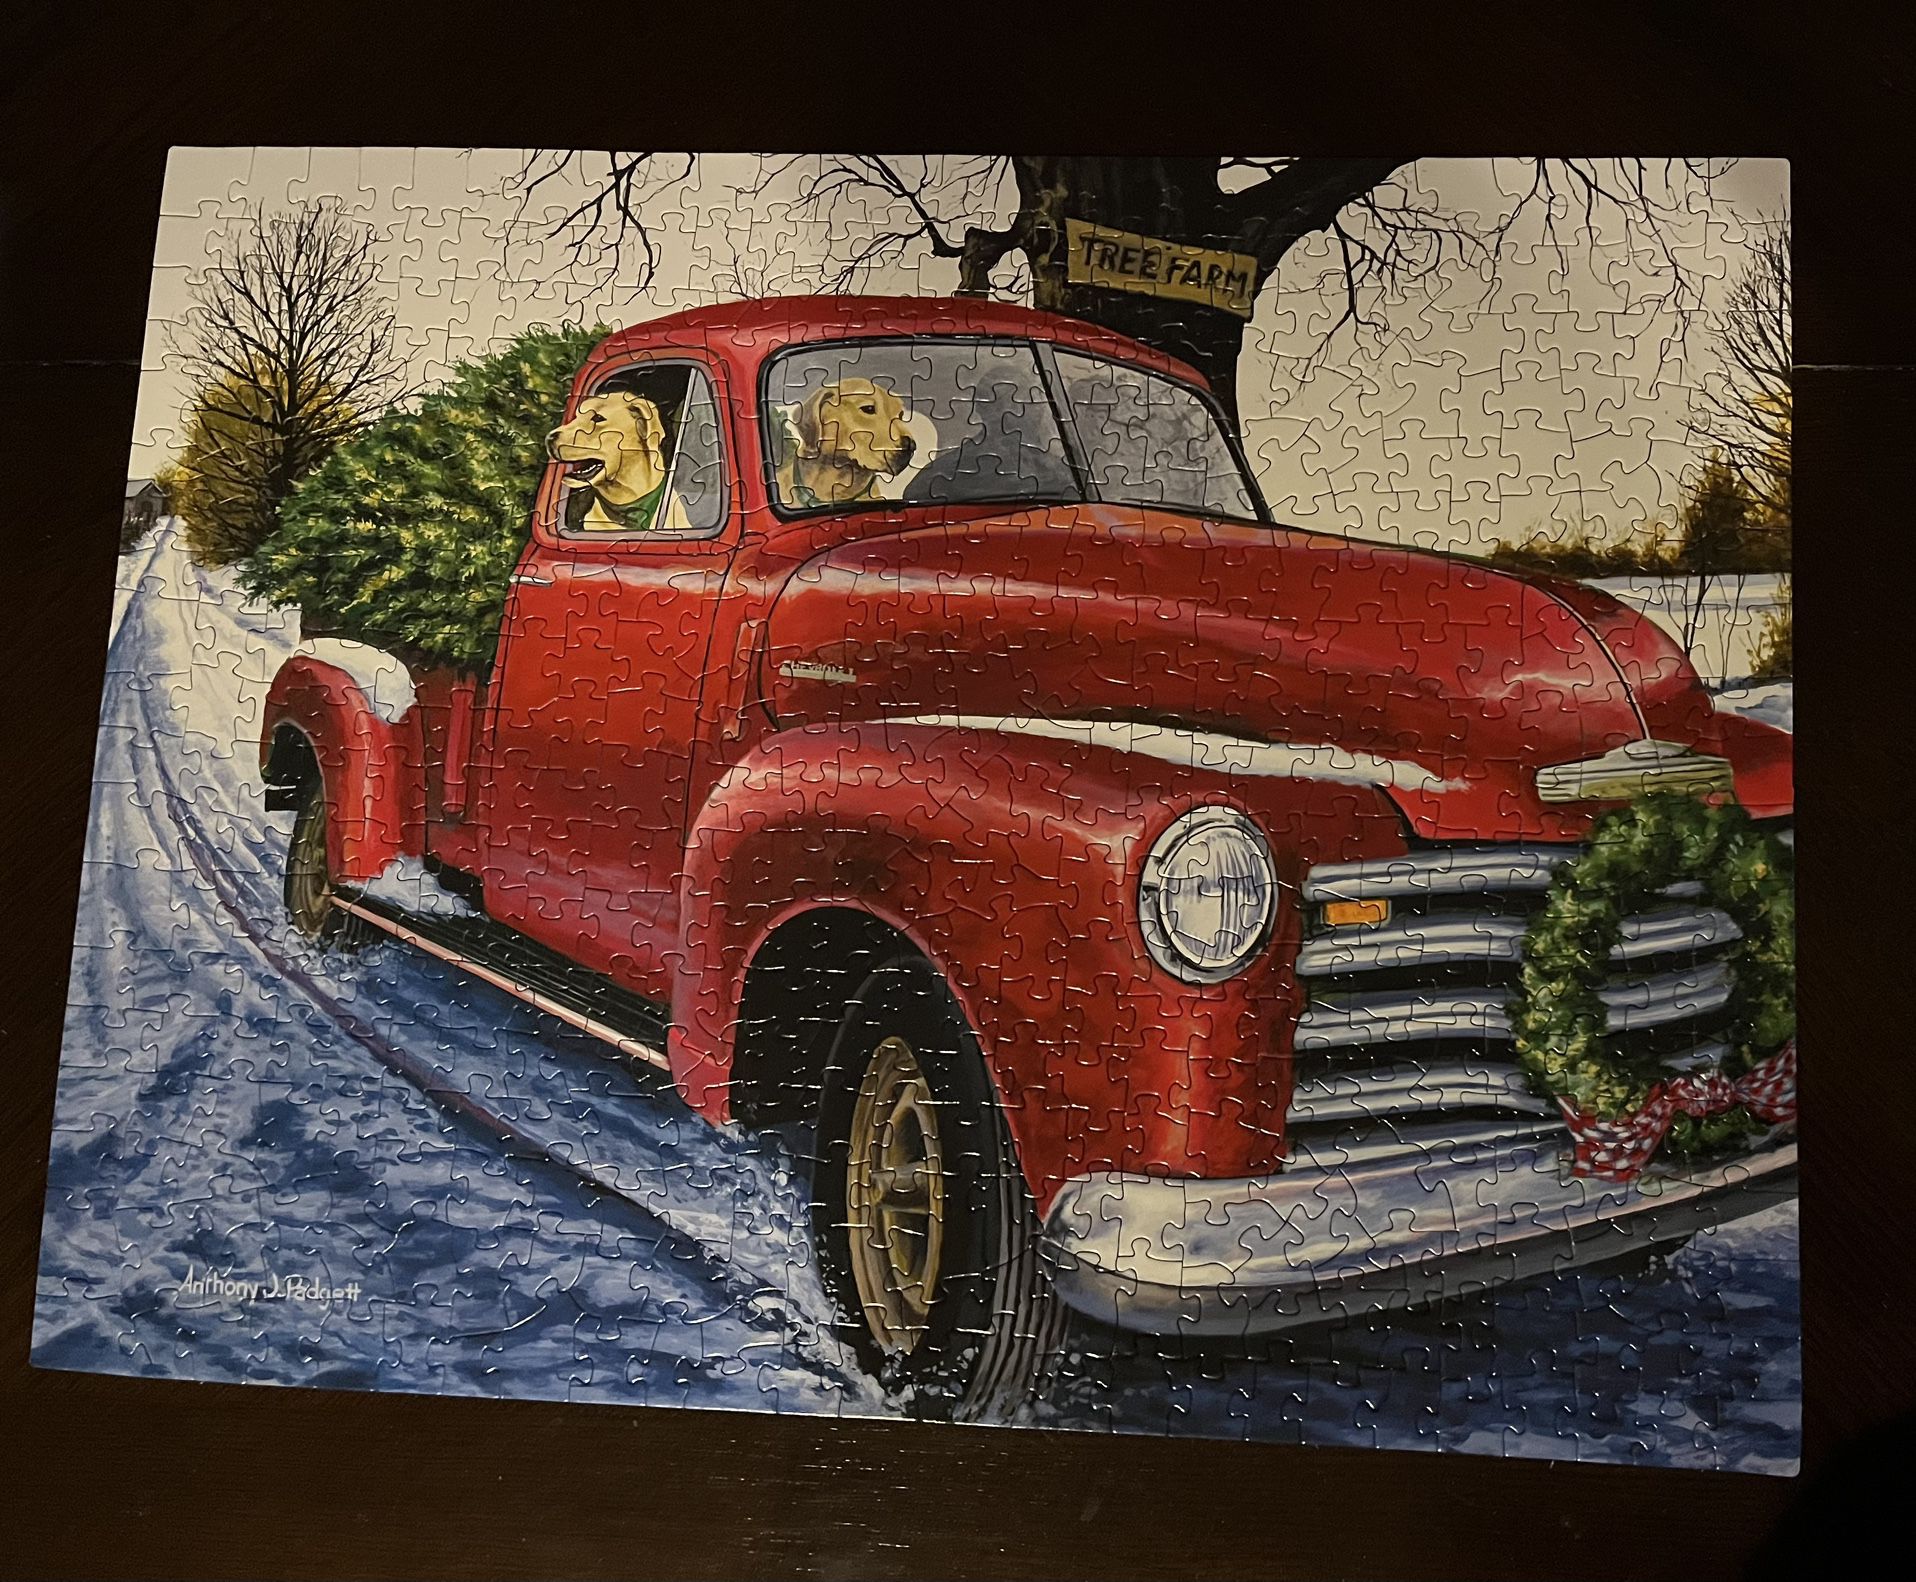 SunsOut Anthony Padgett “Tree Farm” 500 Pc Puzzle (all Pieces Accounted For)